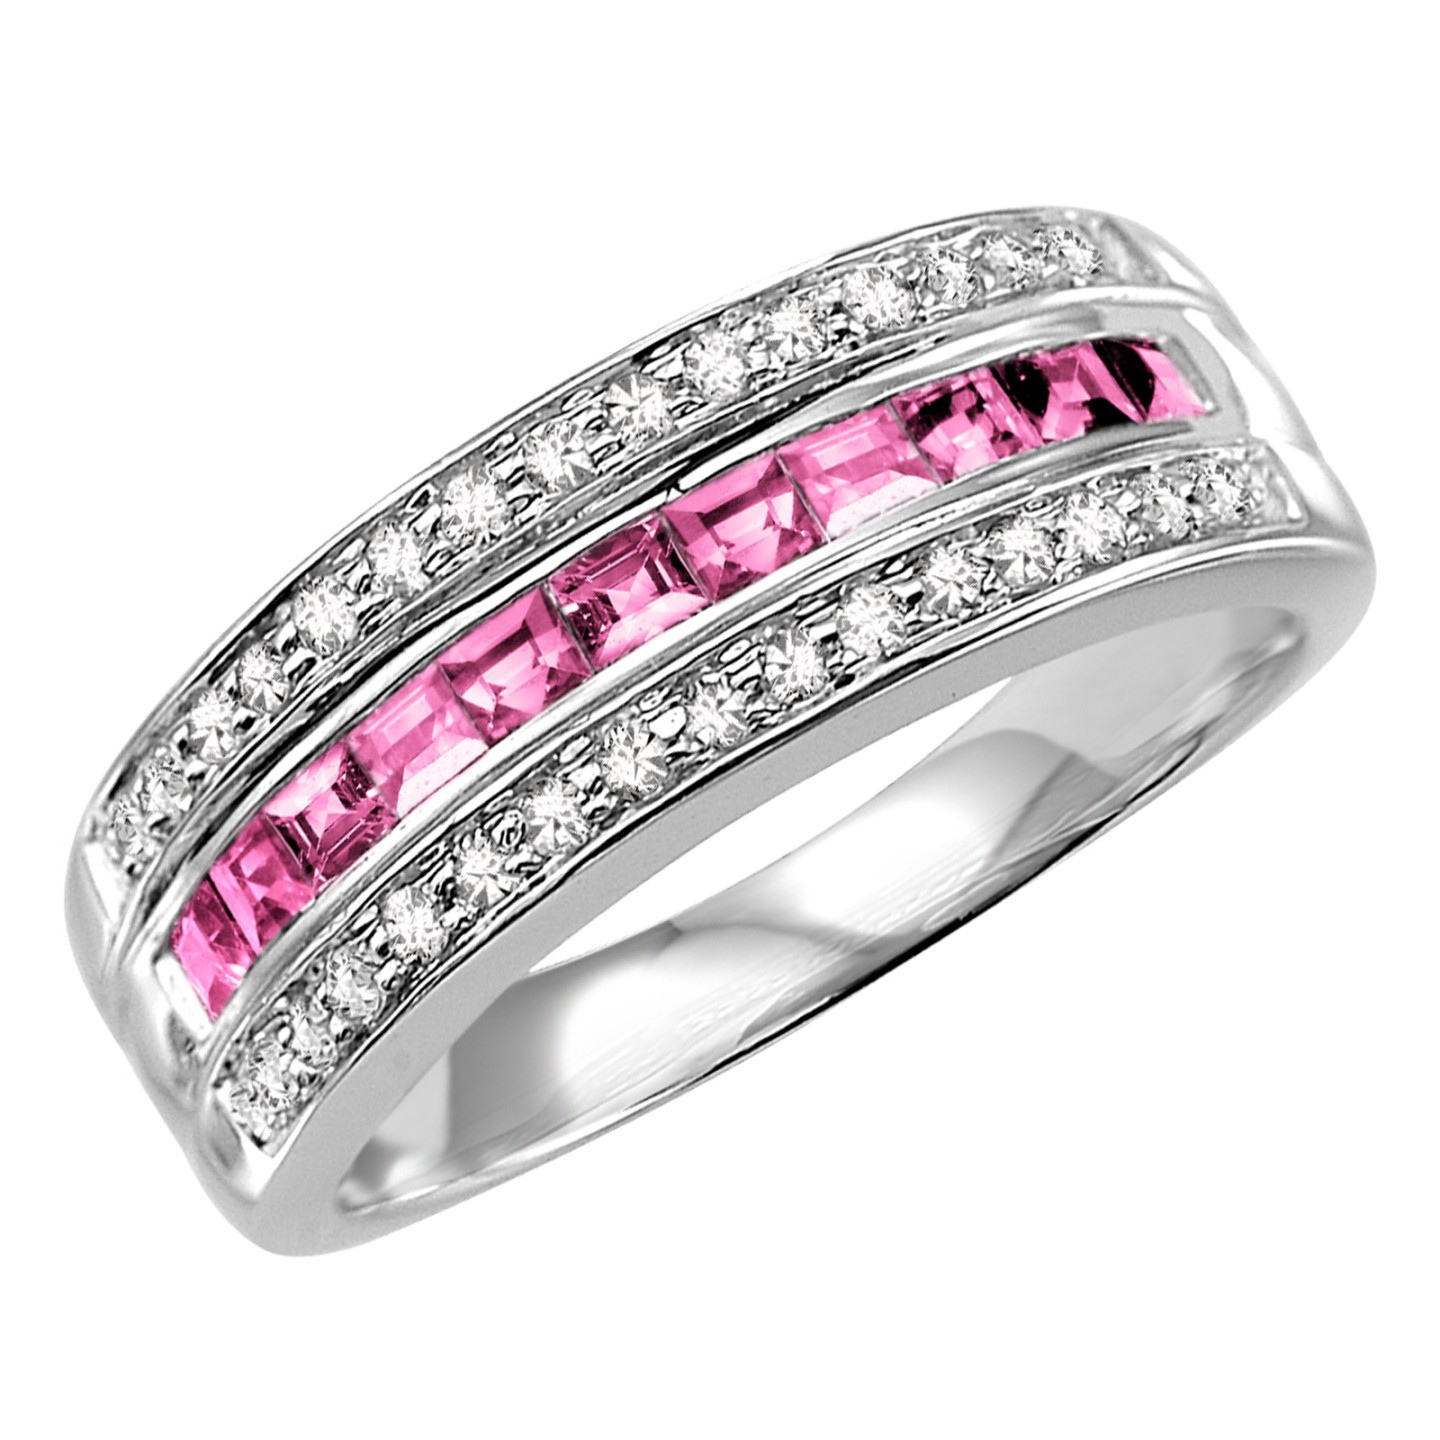 2/3 CTW Princess Pink Sapphire Cocktail Ring in 14K White Gold (MV3002)